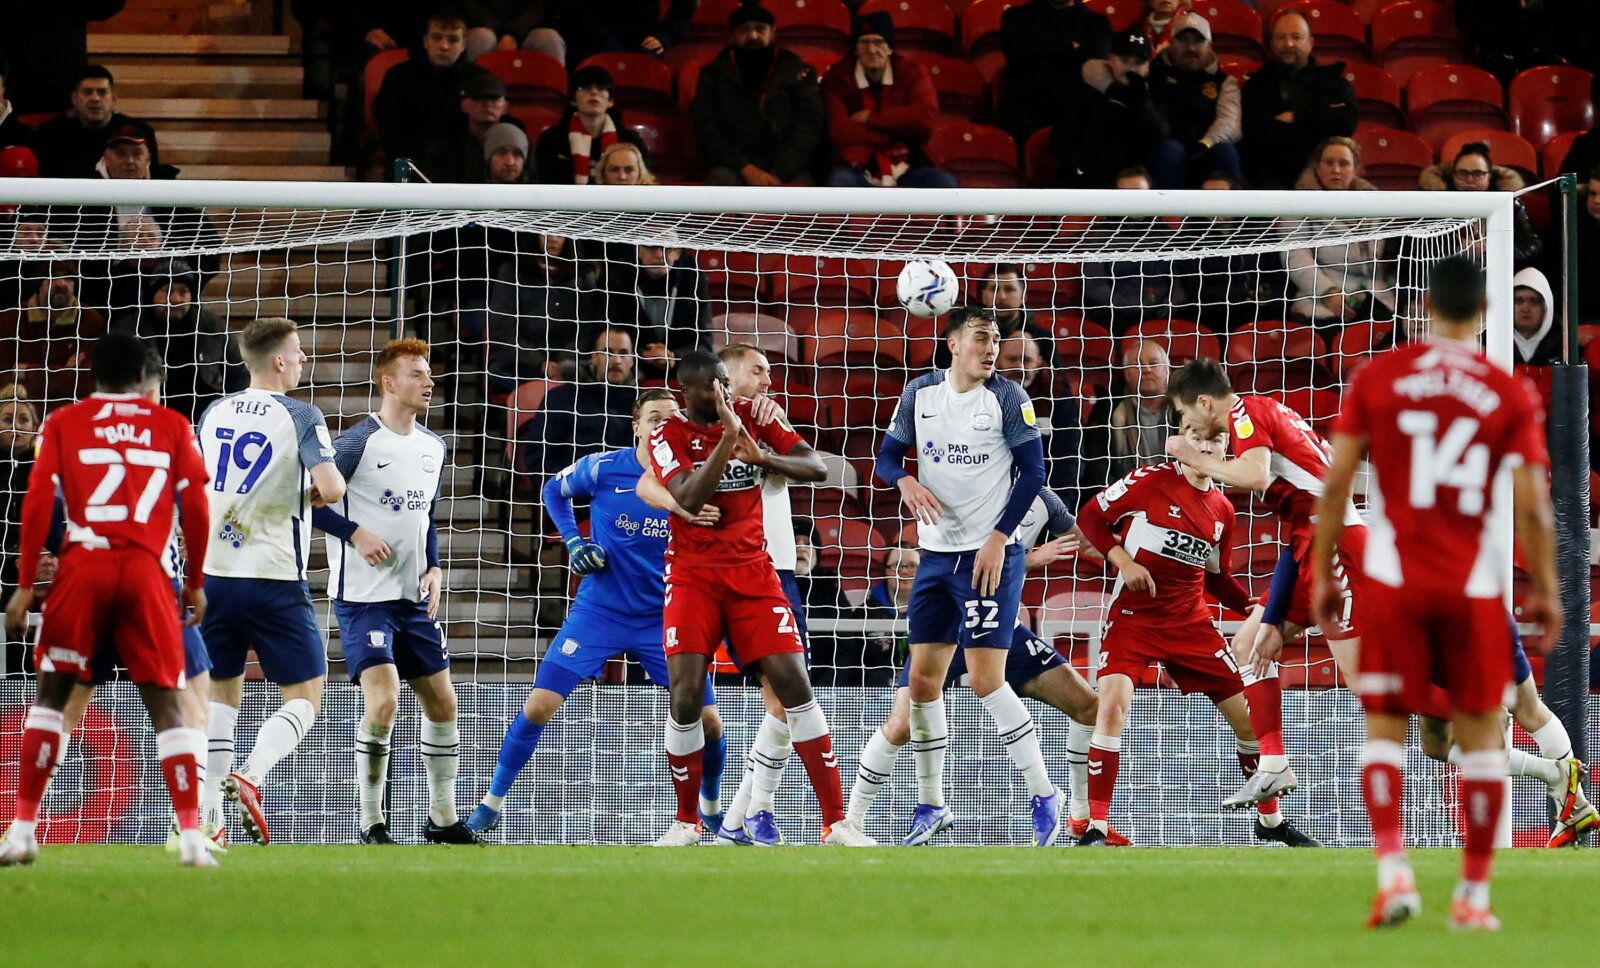 Soccer Football - Championship - Middlesbrough v Preston North End - Riverside Stadium, Middlesbrough, Britain - November 23, 2021 Middlesbrough's Paddy McNair scores their first goal  Action Images/Craig Brough